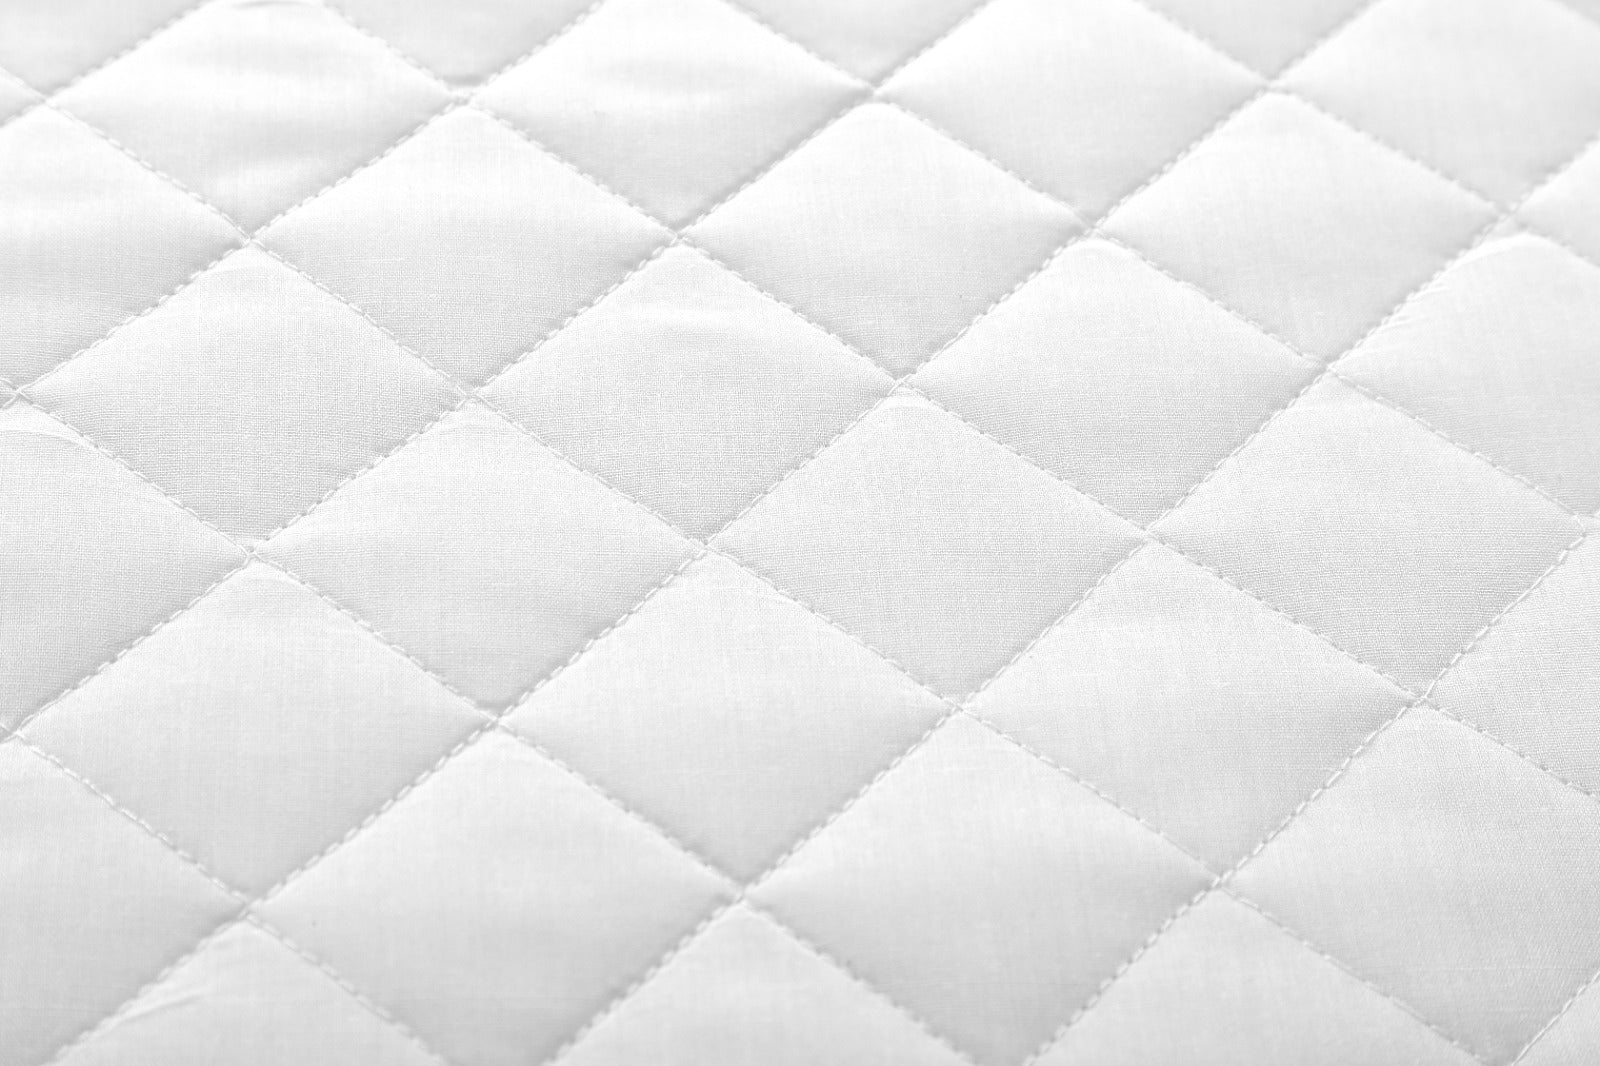 Breathable design to keep your mattress fresh and dry Soft, quiet, and comfortable fabric for restful night's sleep Hypoallergenic and dust mite resistance to promote healthy sleep Easy-fit design for a sung and secure fit on your mattress Machine washable and dryable for hassle-free maintenance